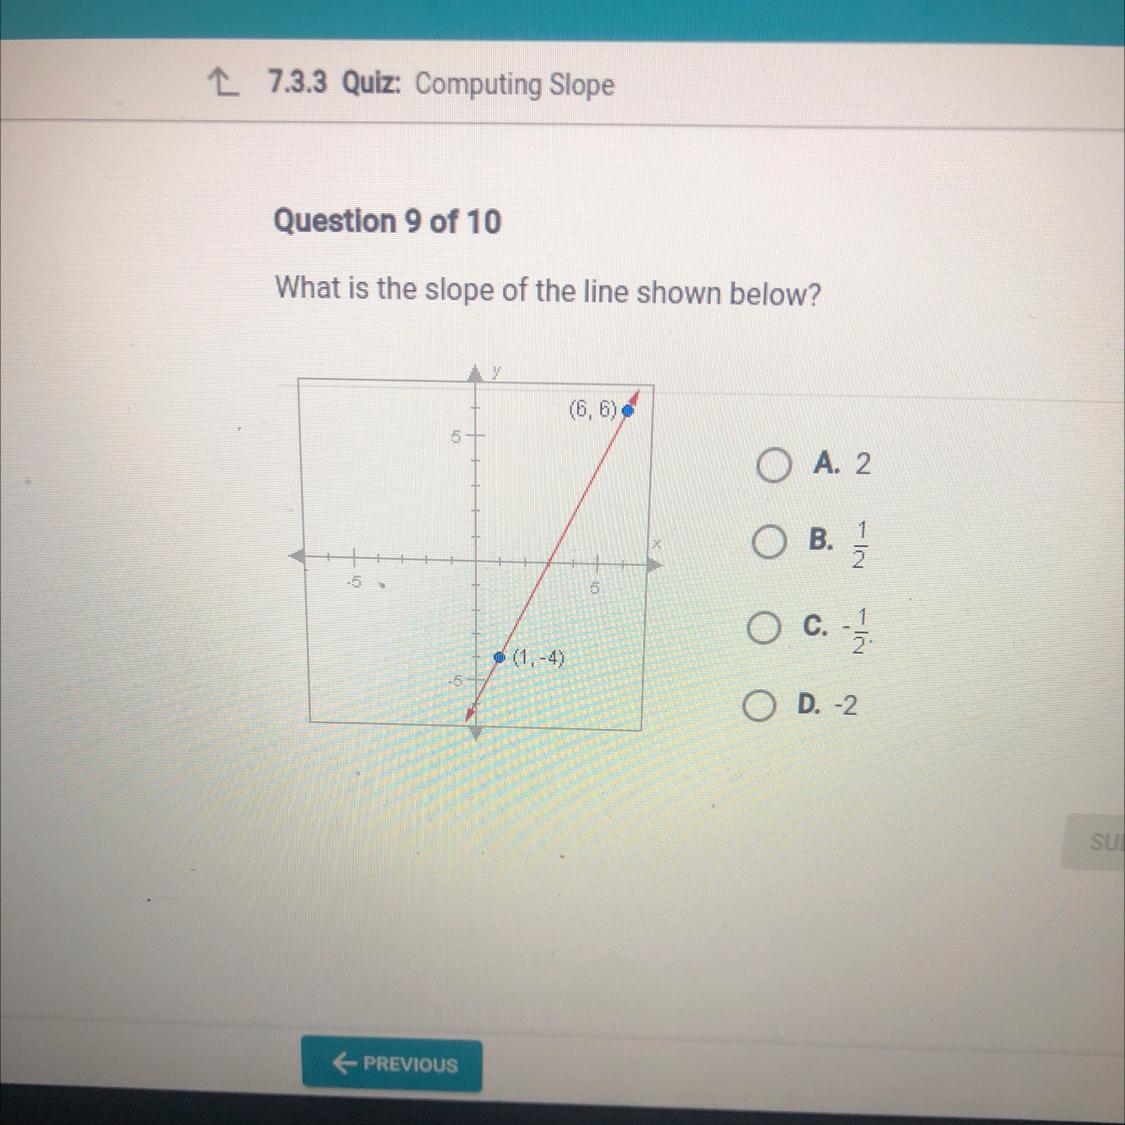 Could You Help Me Find The Slope Of The Line Below 